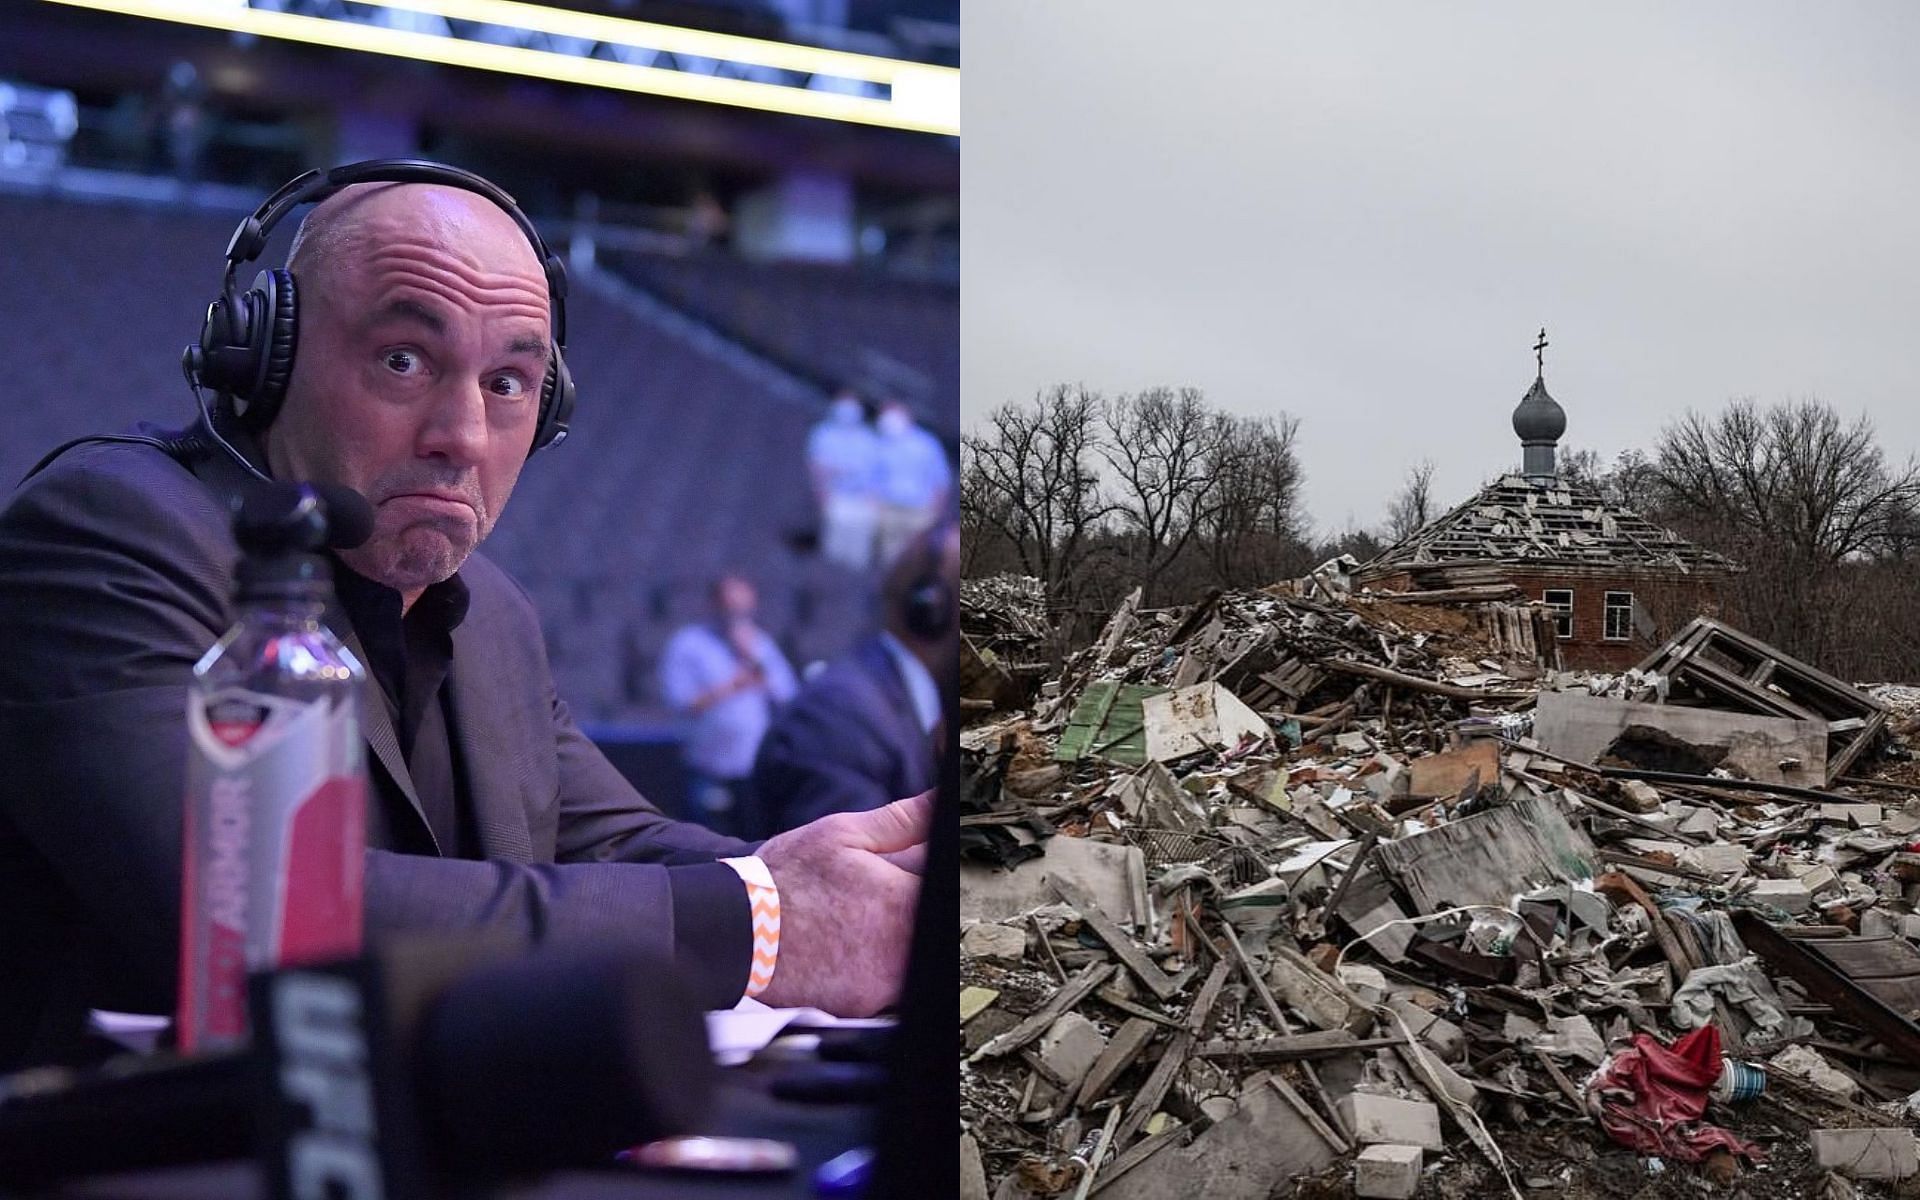 Joe Rogan and the destruction caused by the war